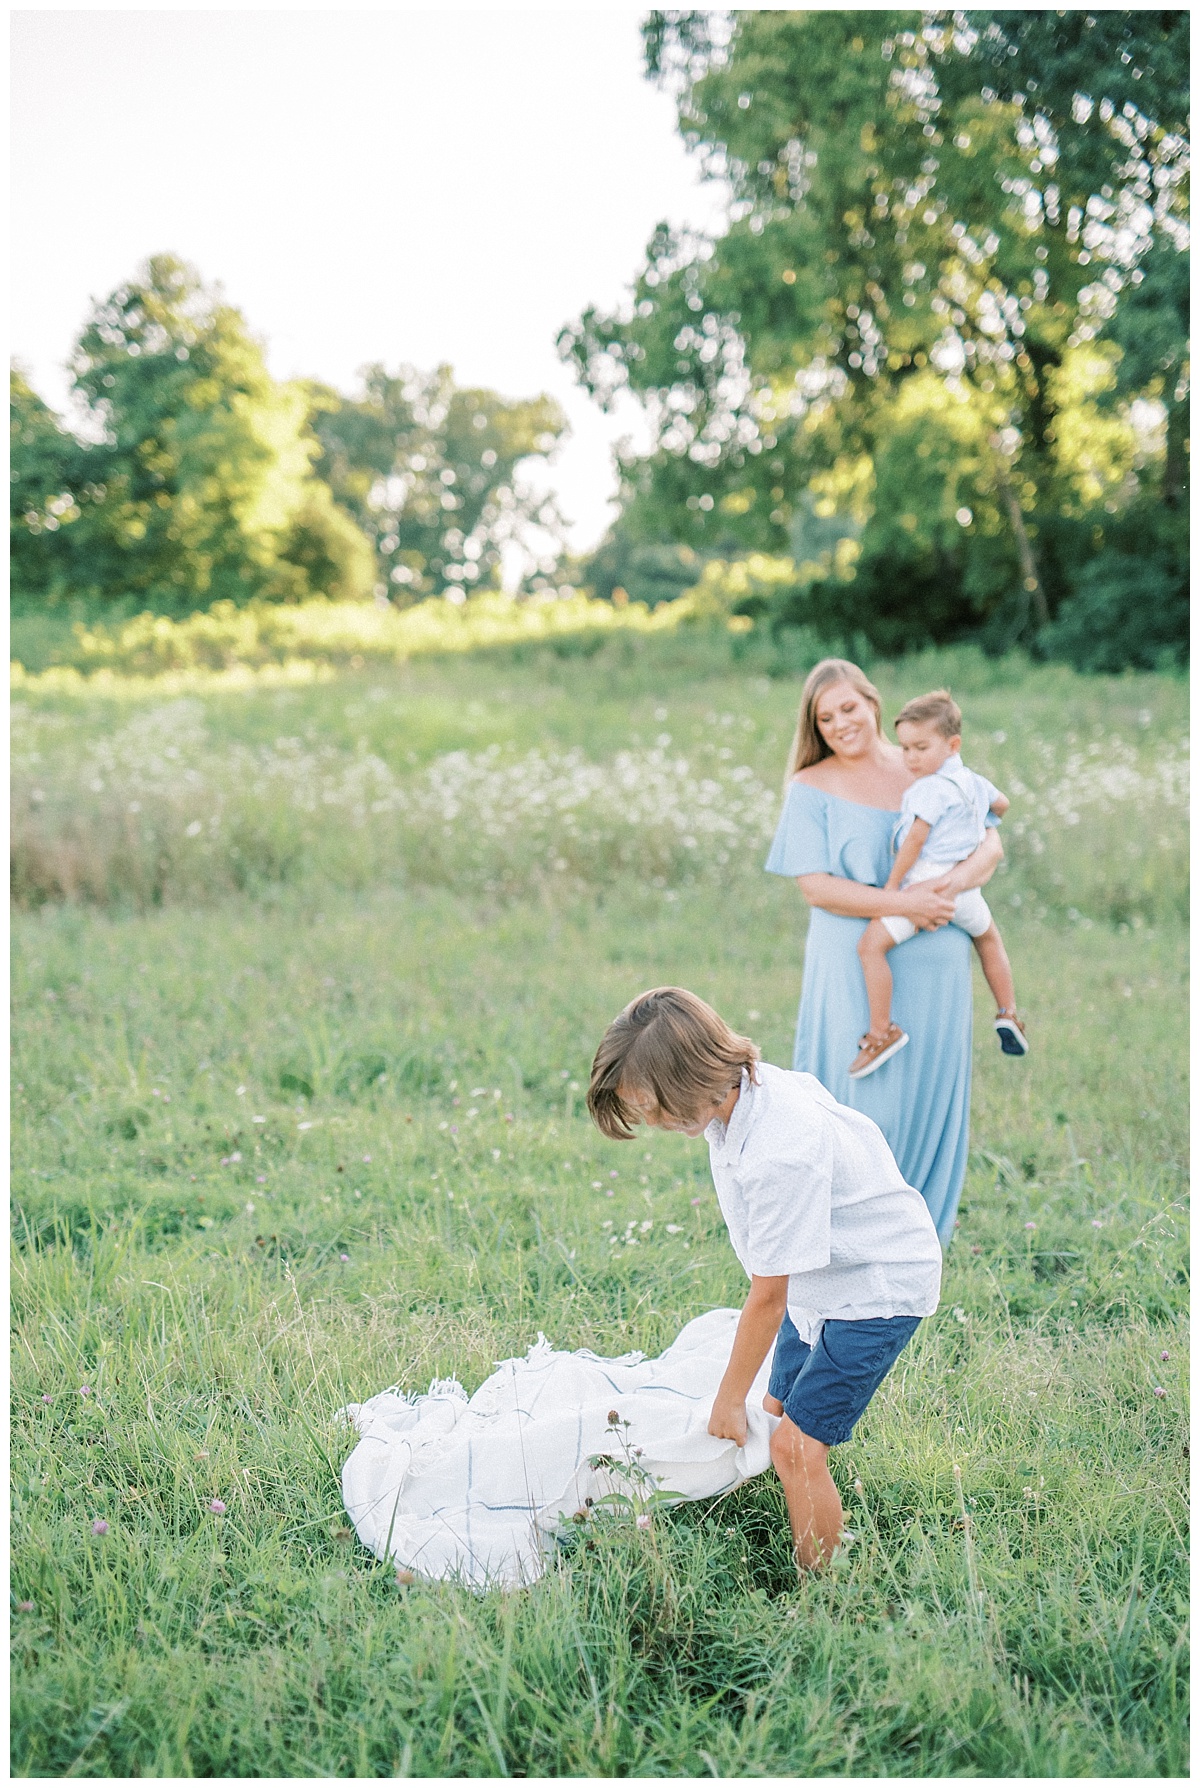 Outdoor family photo session in Murfreesboro, TN by Grace Paul Photography.